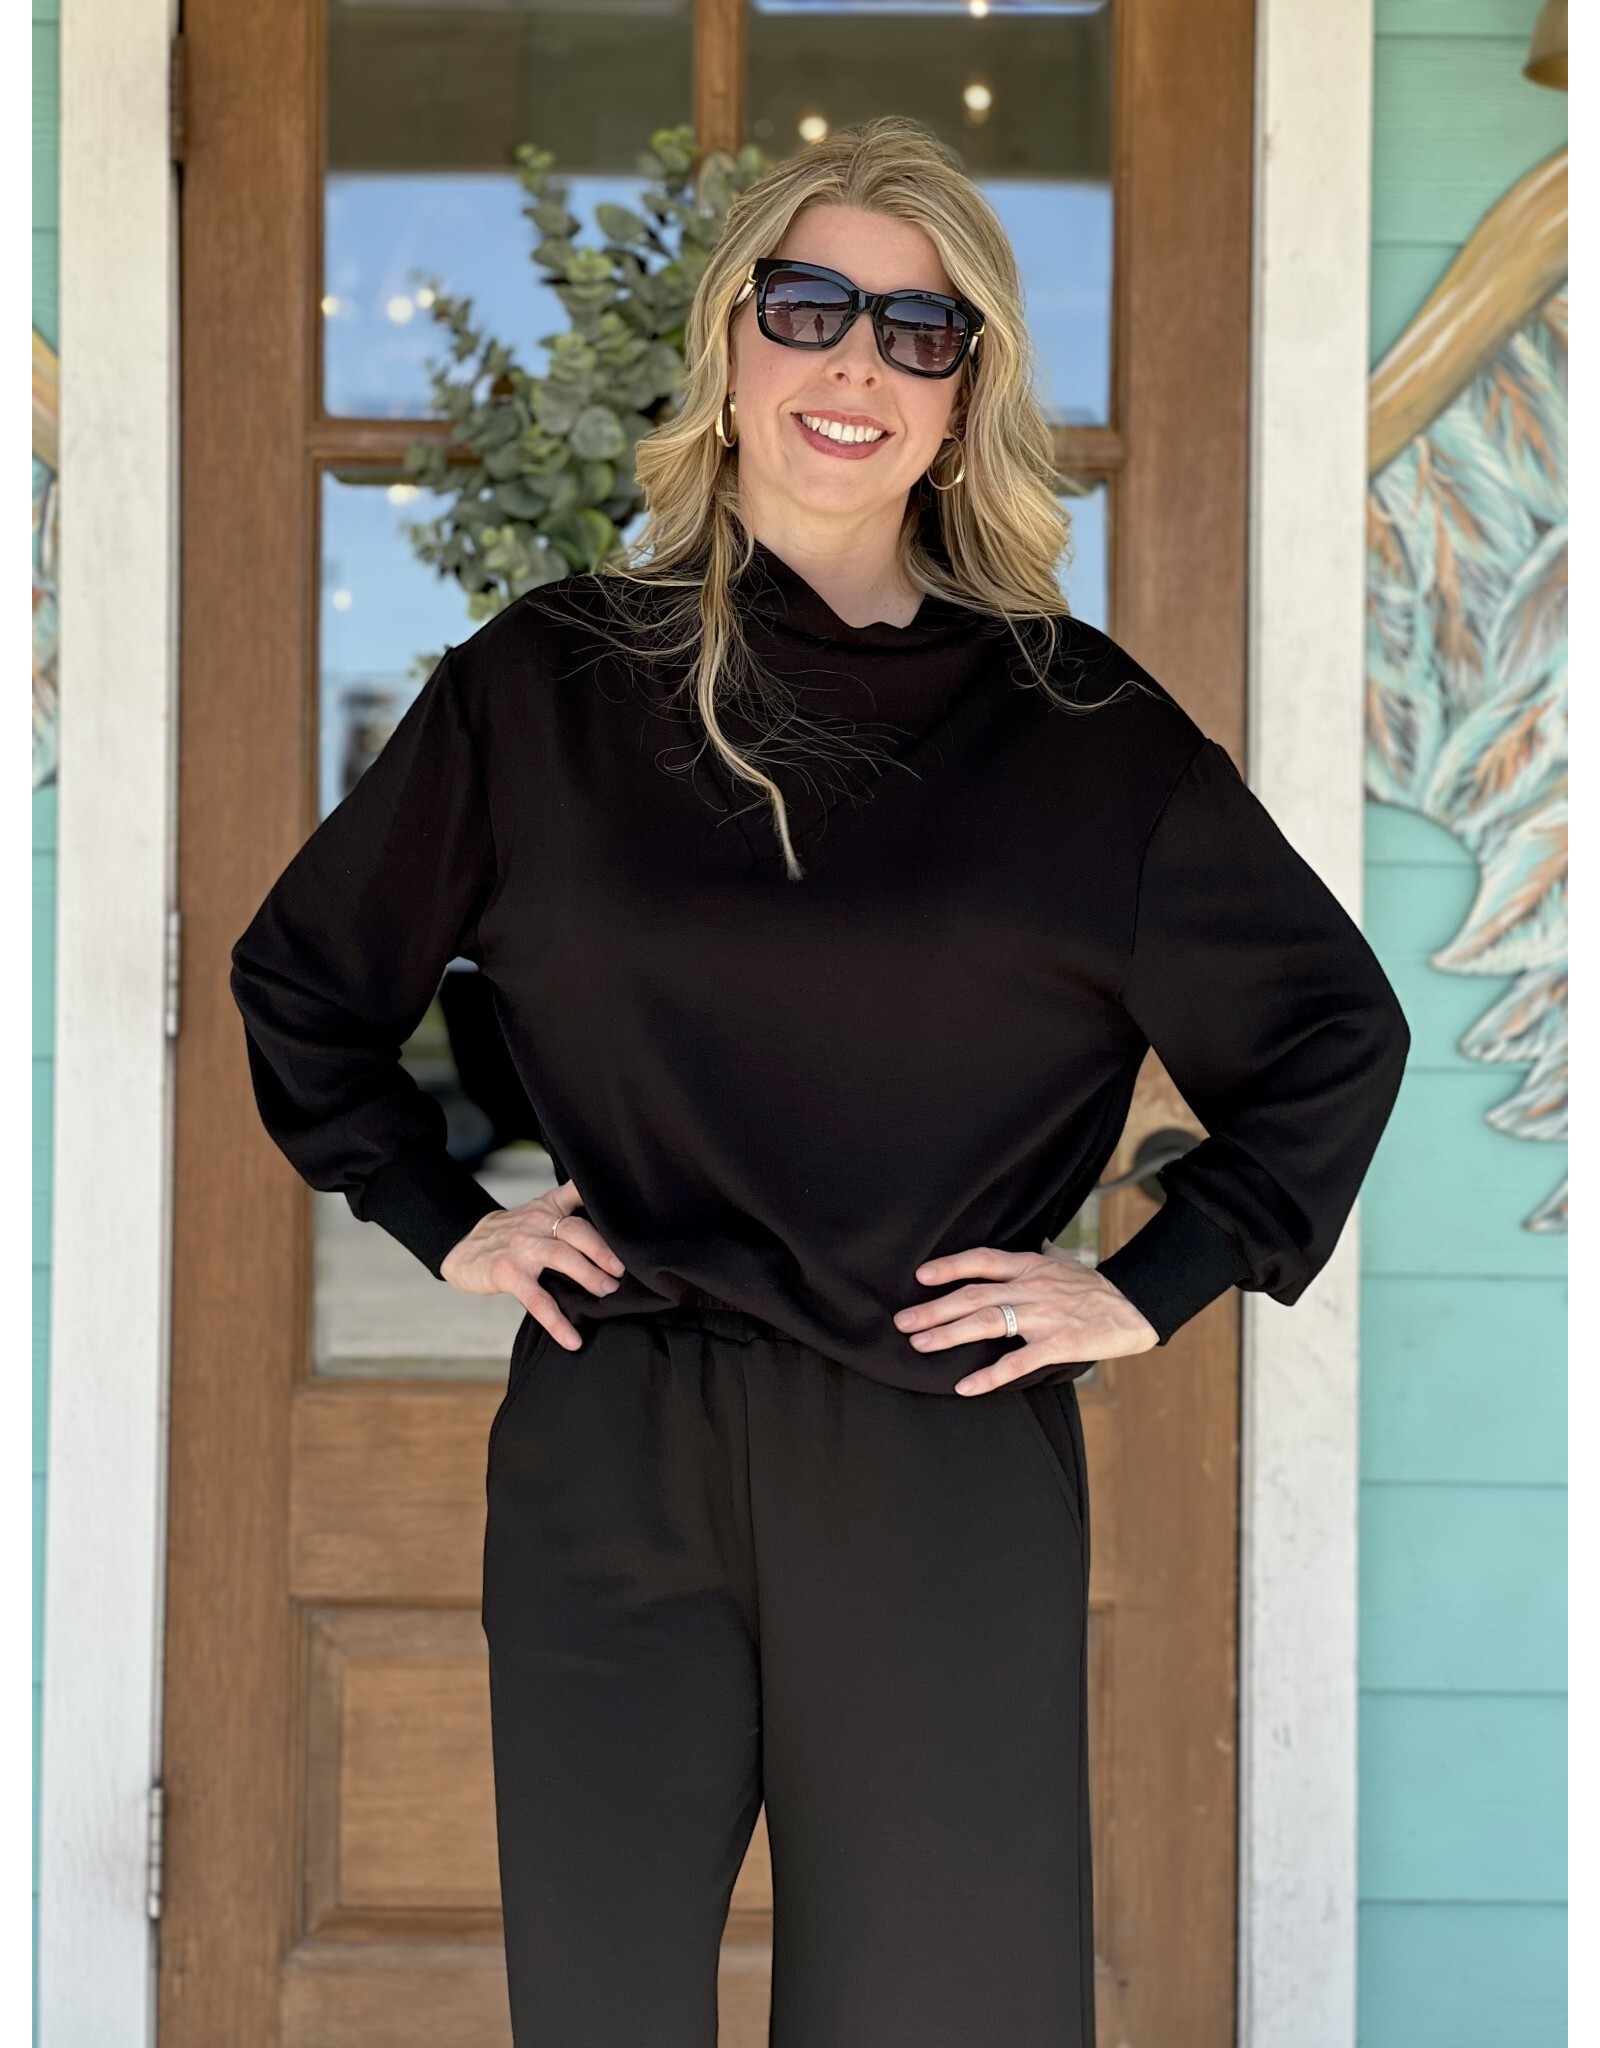 Black Long Sleeve Soft Pullover Top